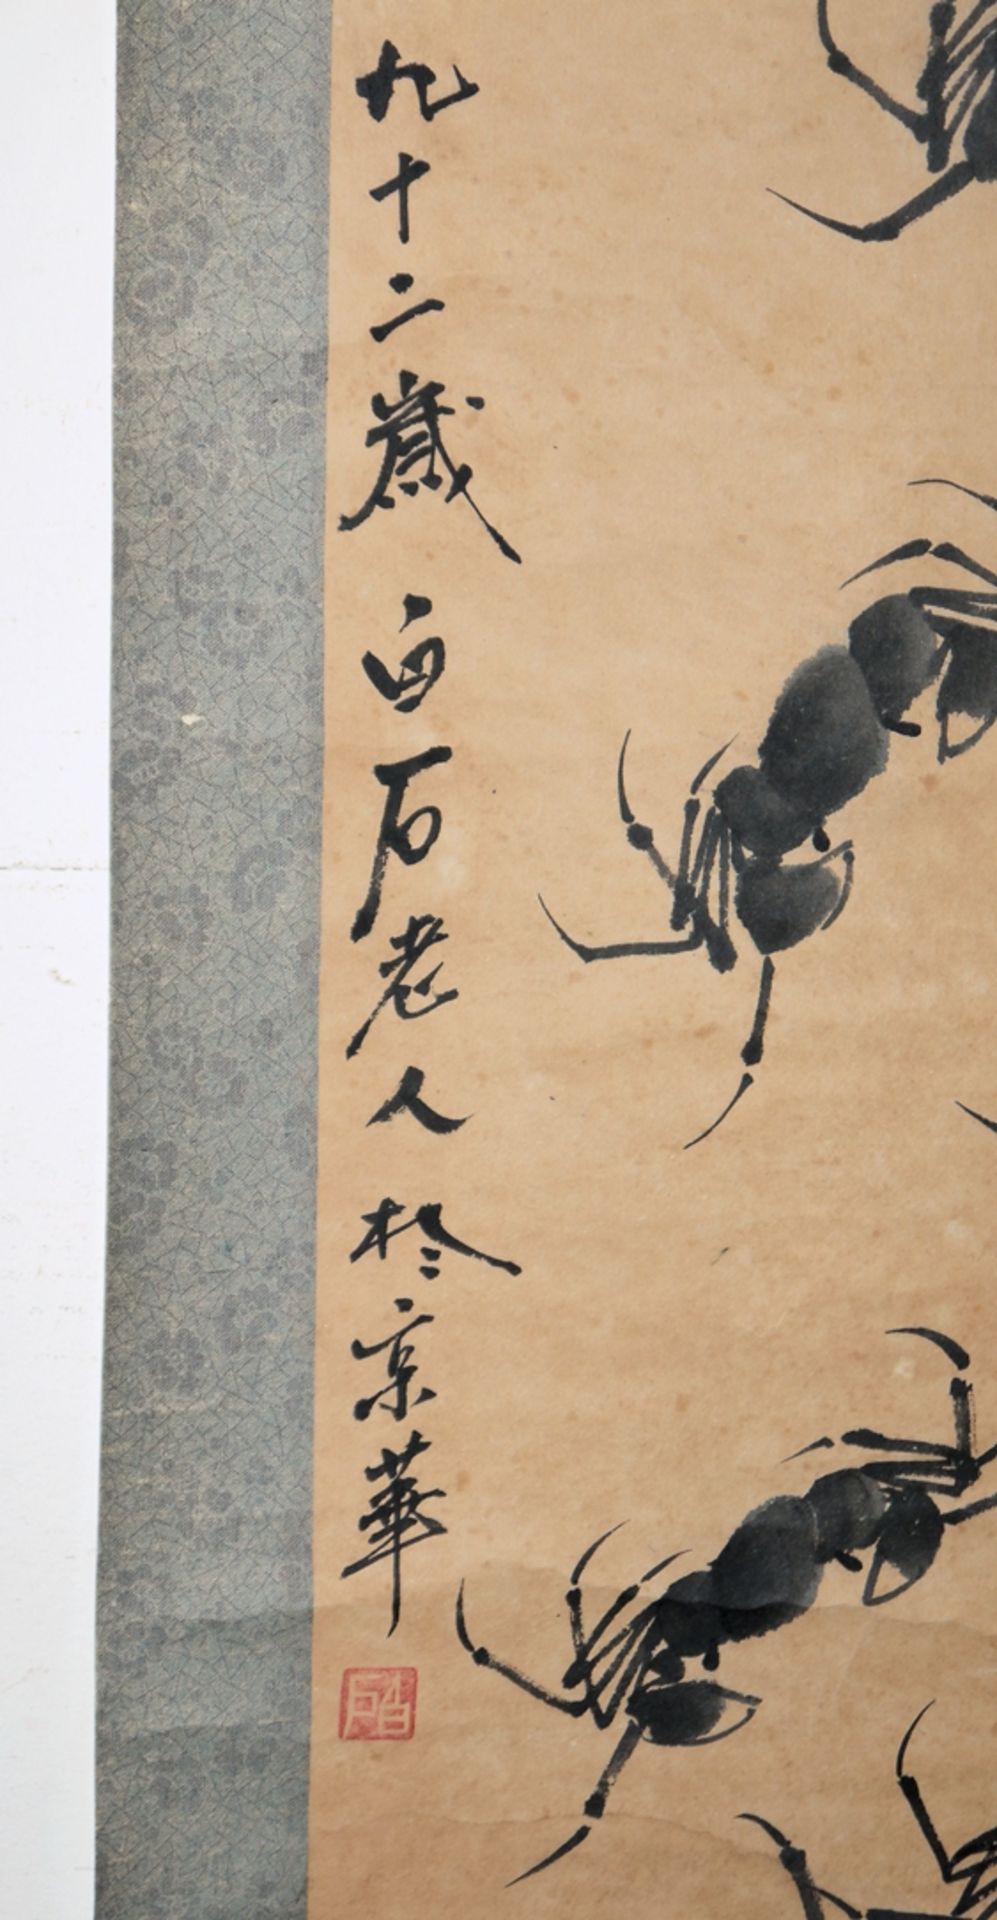 Lin Zongji, Nine Crabs, ink painting, China 20th century - Image 3 of 4